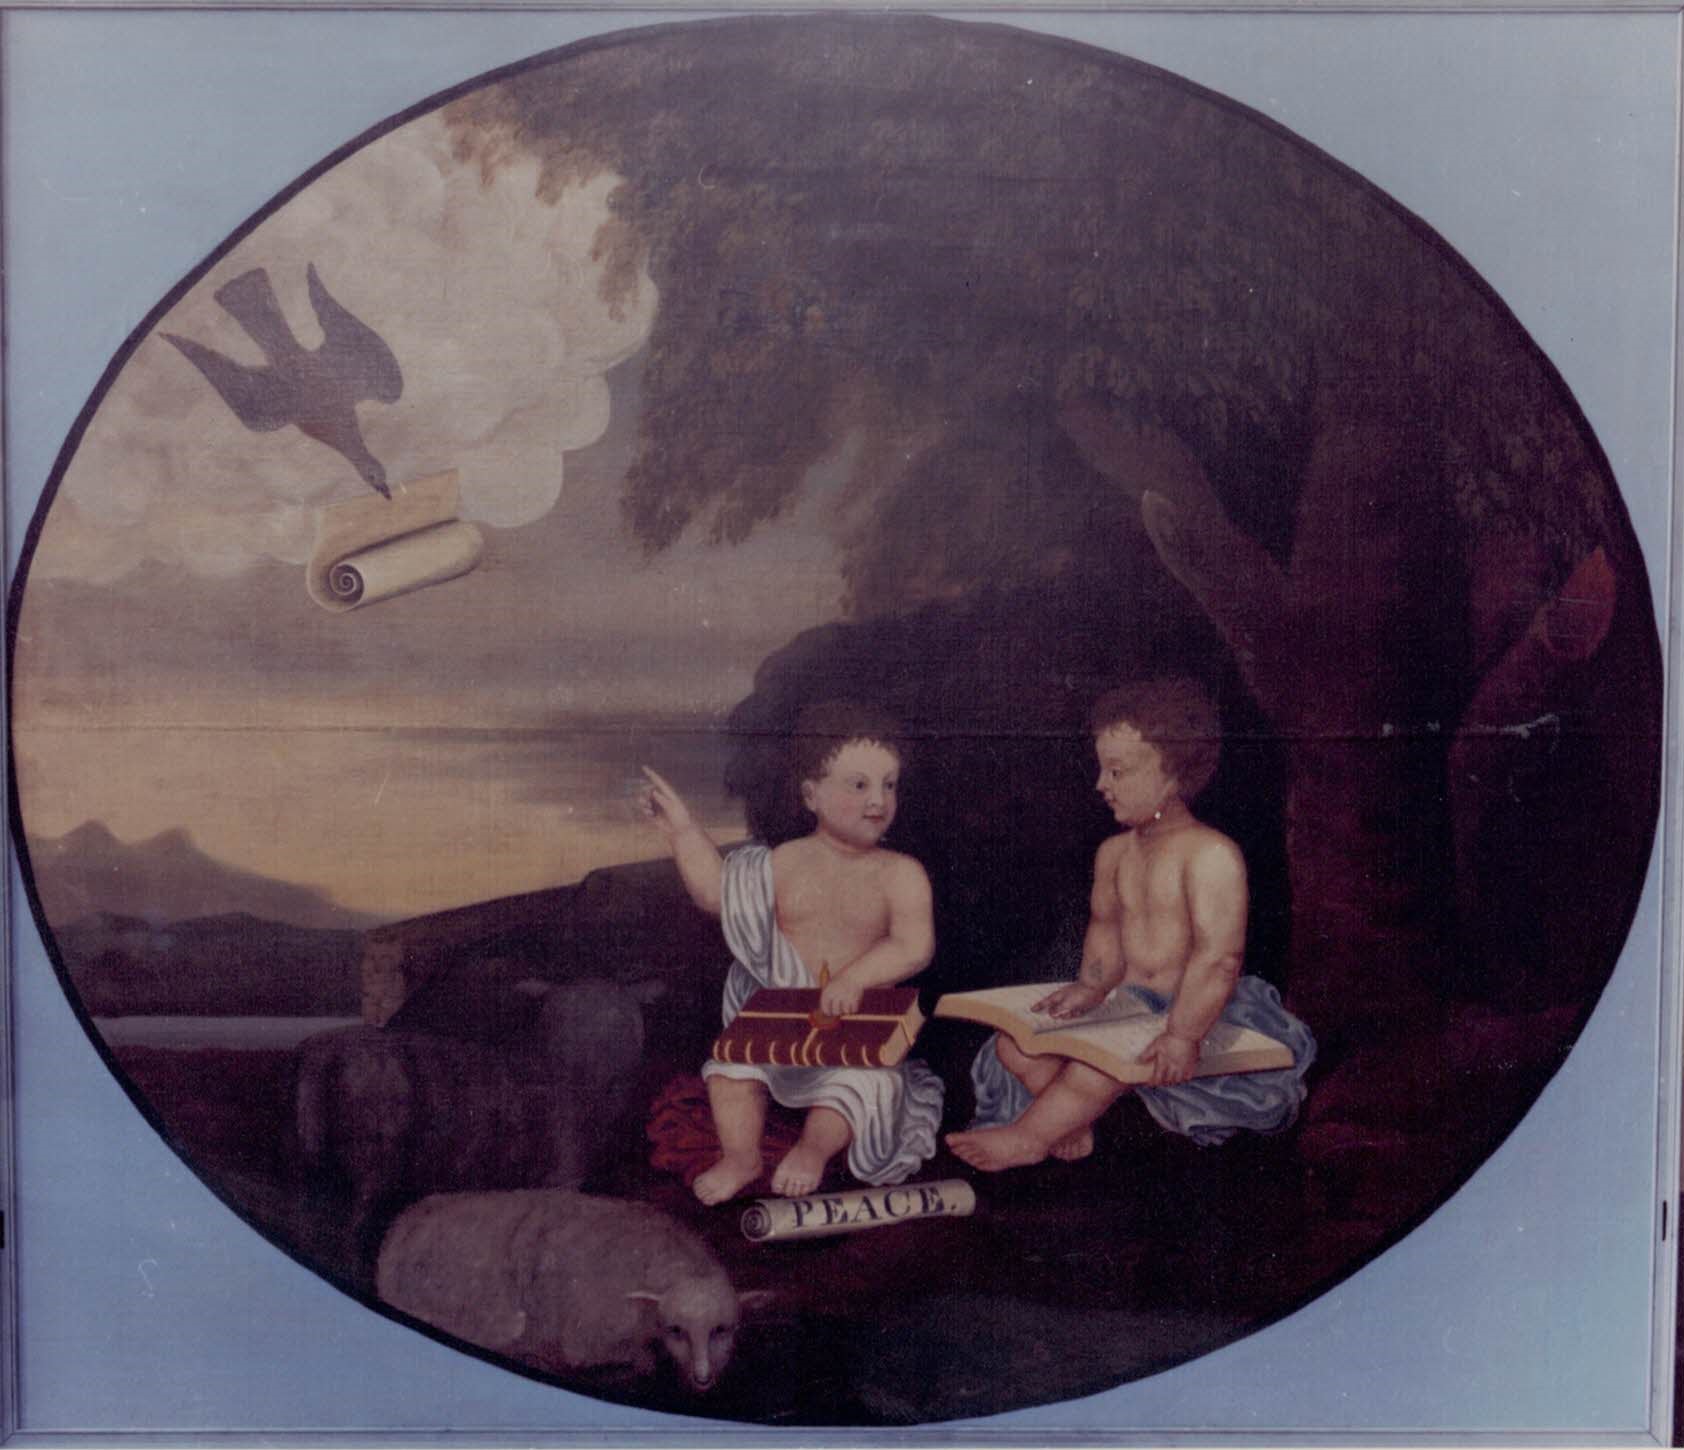 This painting by Richard Coates sits above the West door inside the Temple. It illustrates the same two children from the other painting sitting beneath a tree receiving a message from God by a dove.